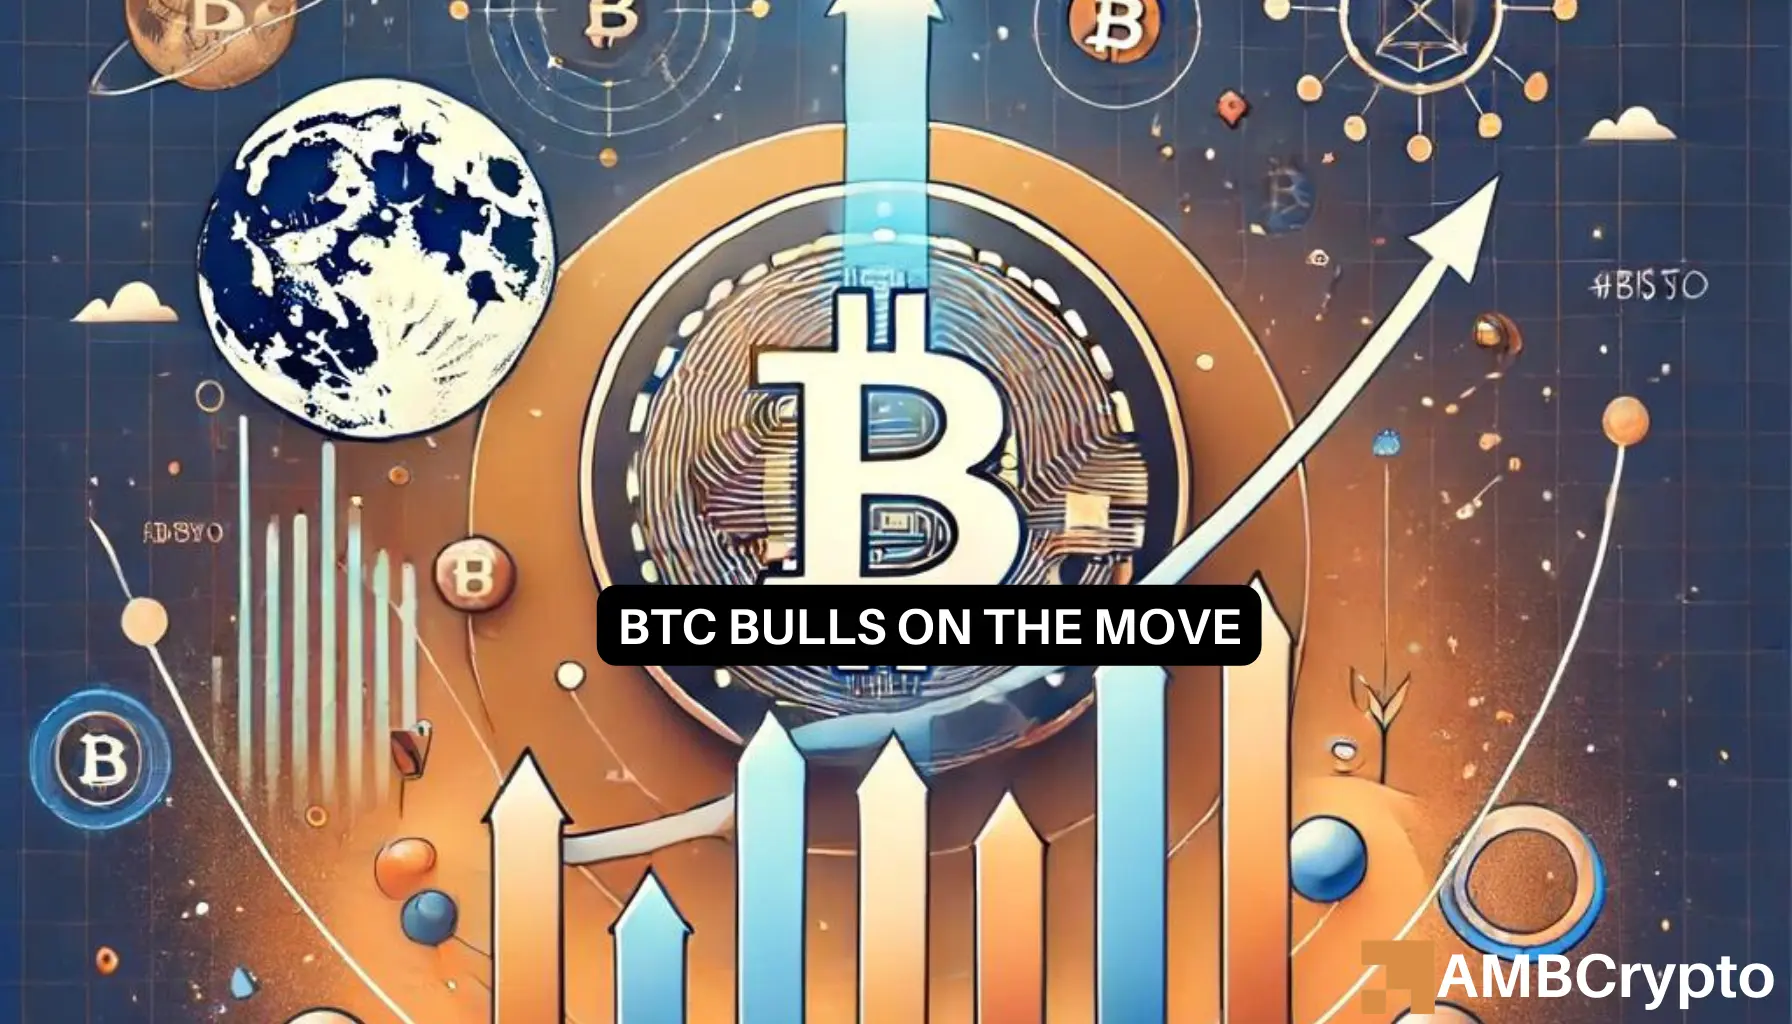 Bitcoin at $67K: Investors buy the dip, but is that good news for $70K target?